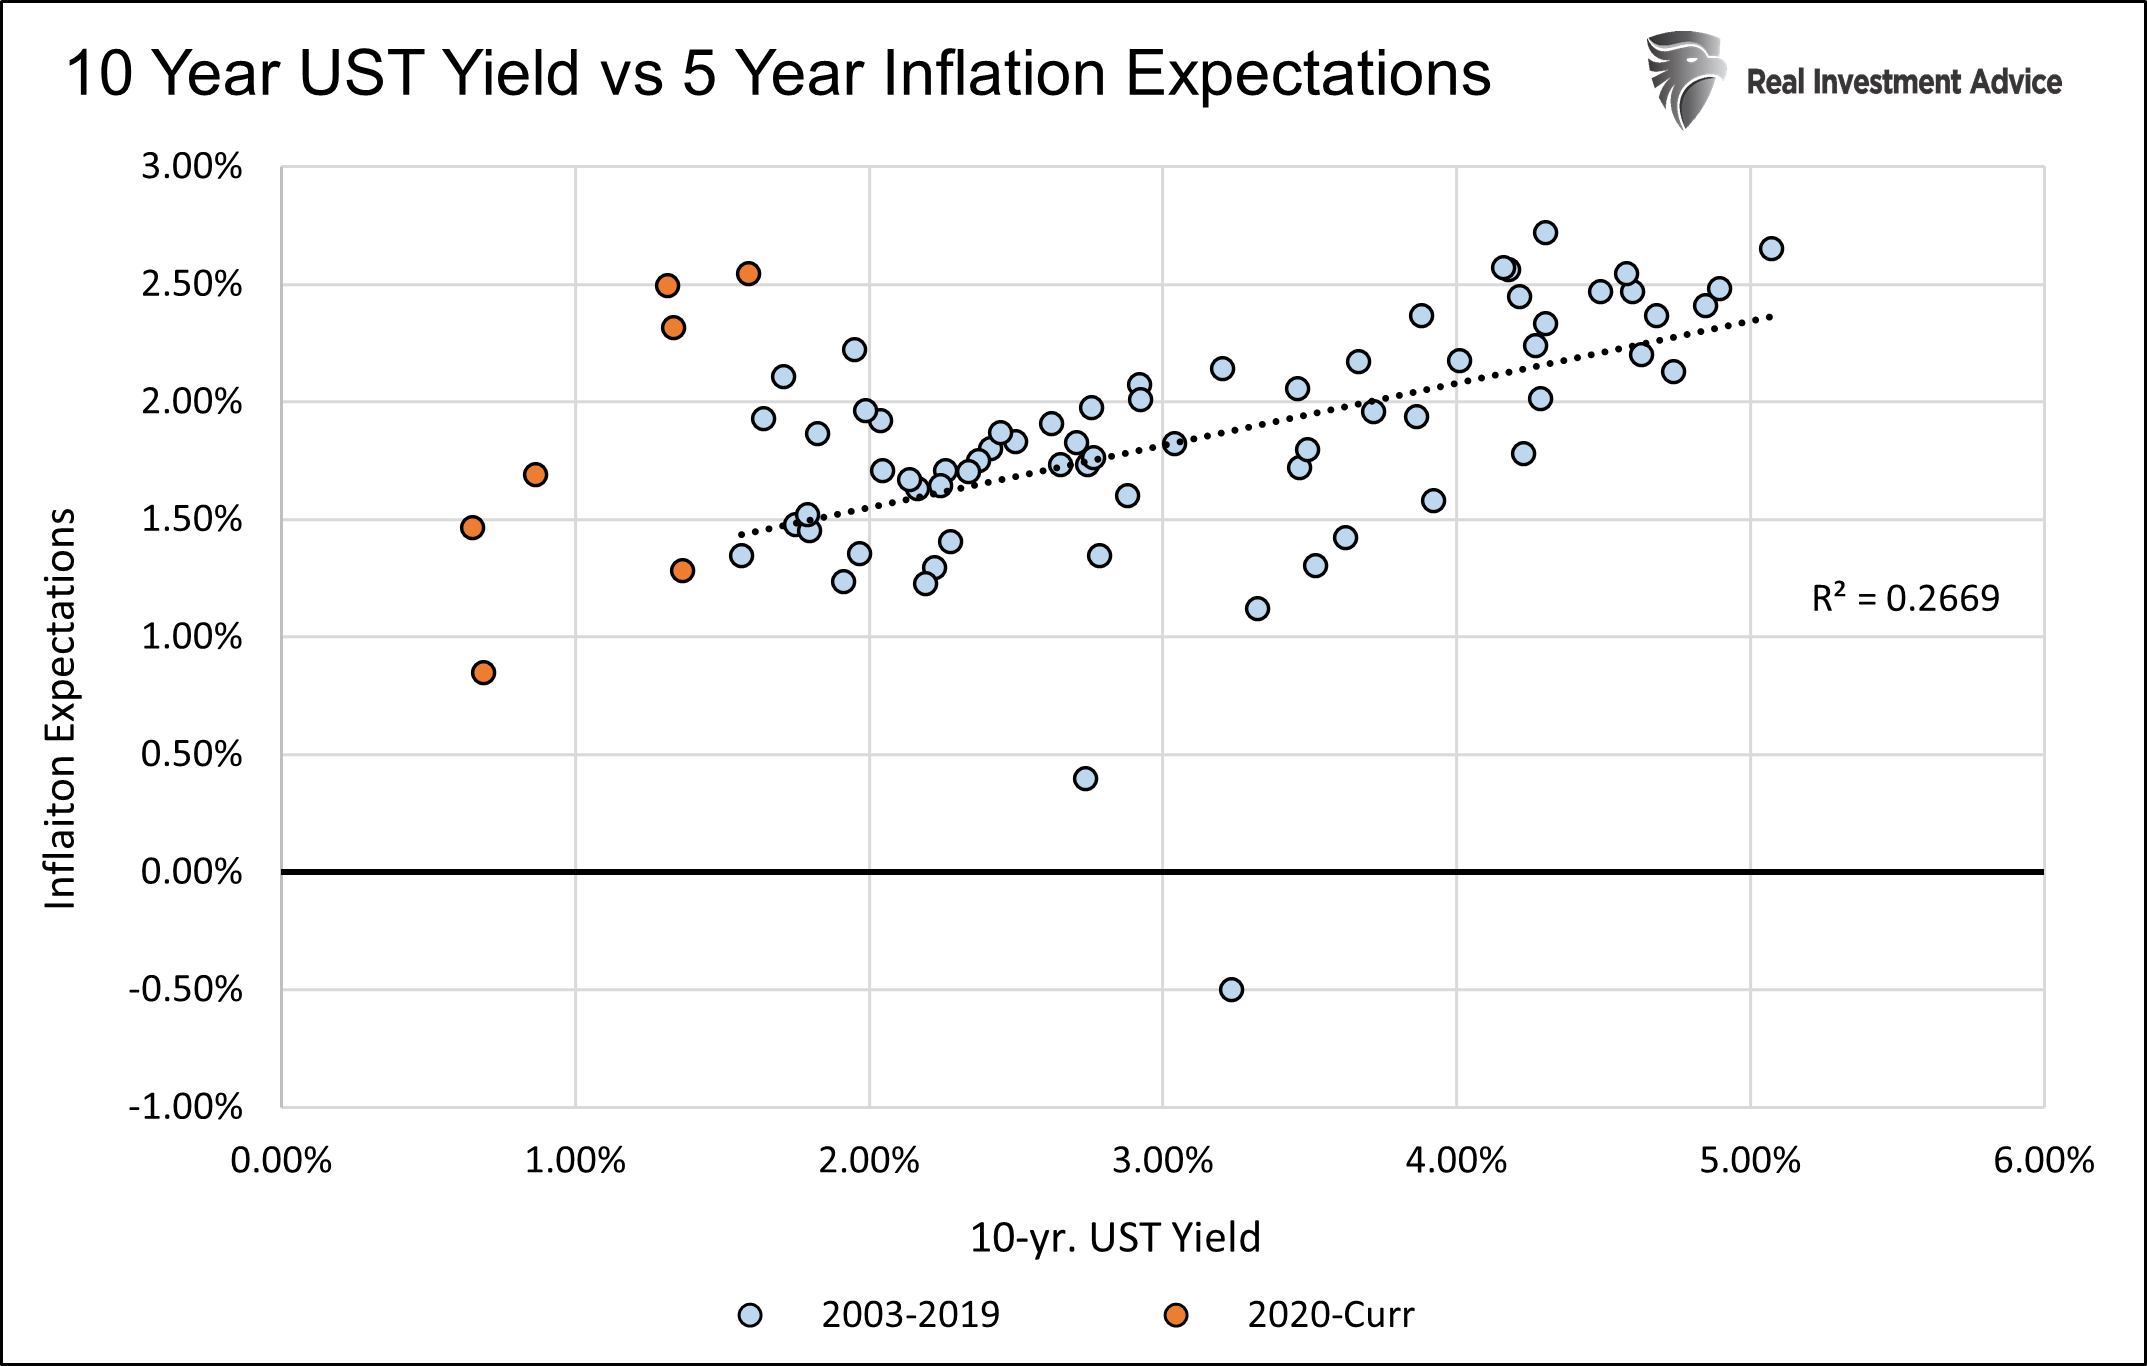 10 Year UST Yield Vs 5 Yr Inflation Expectations